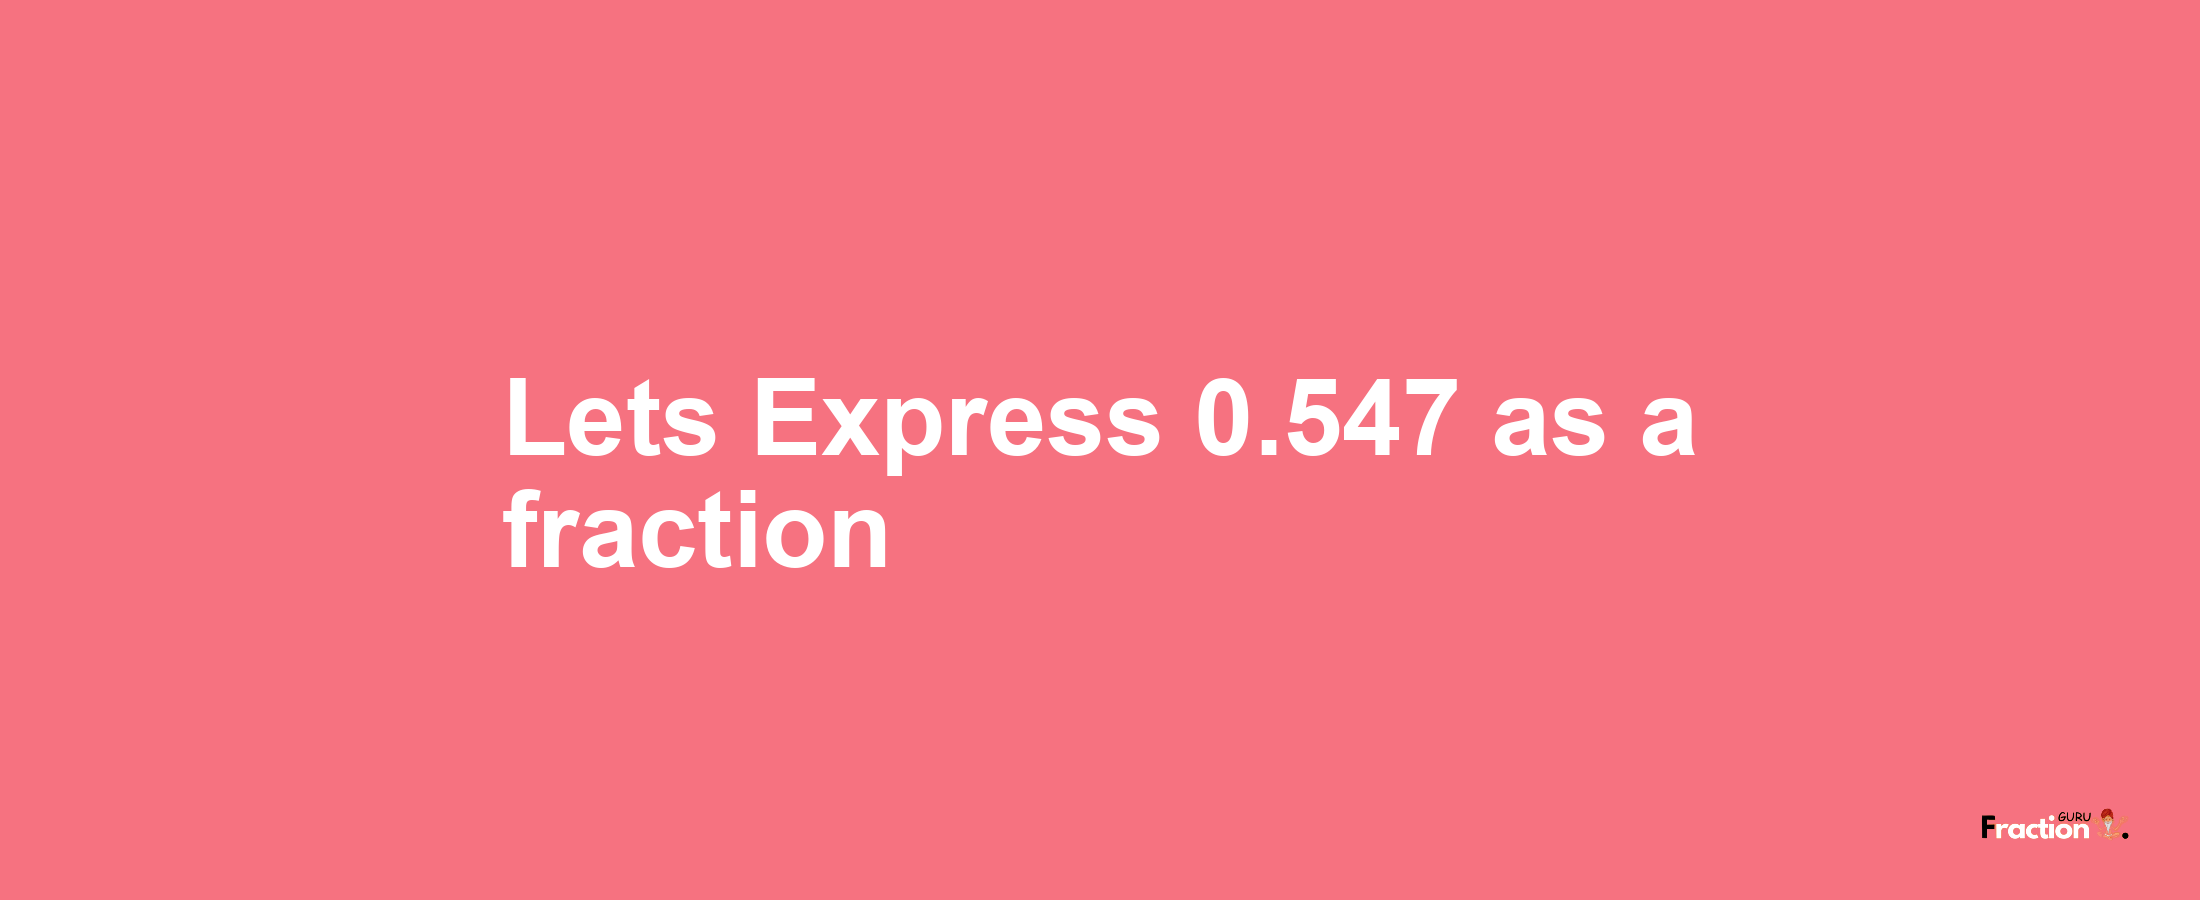 Lets Express 0.547 as afraction